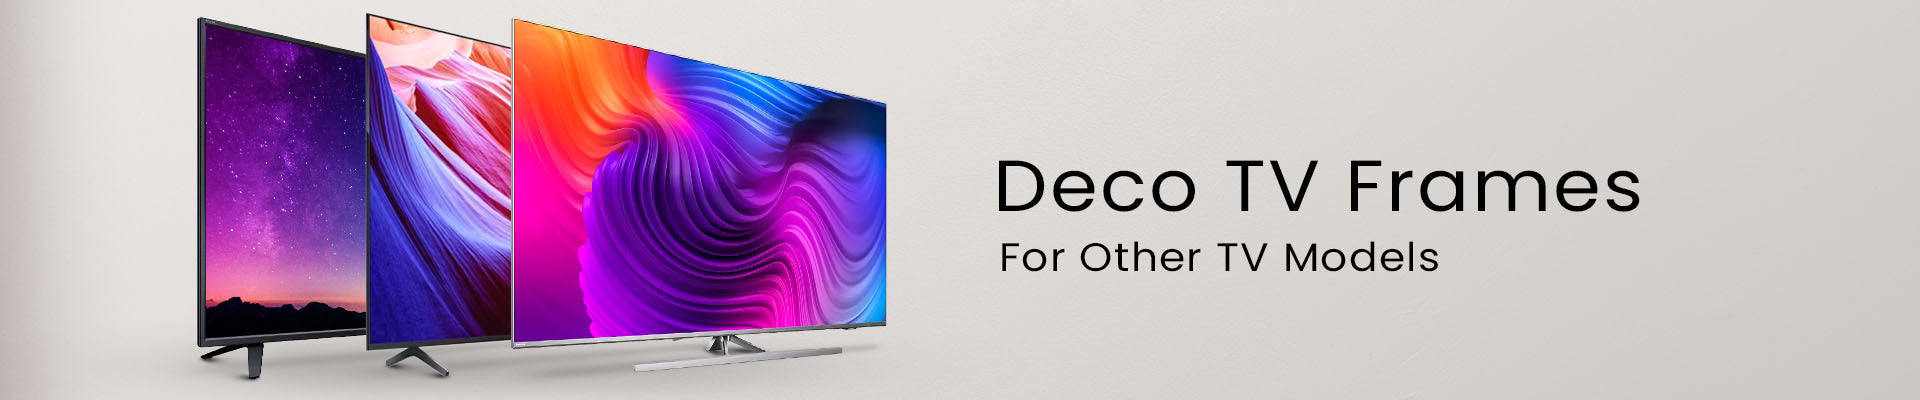 Deco support for other TV models